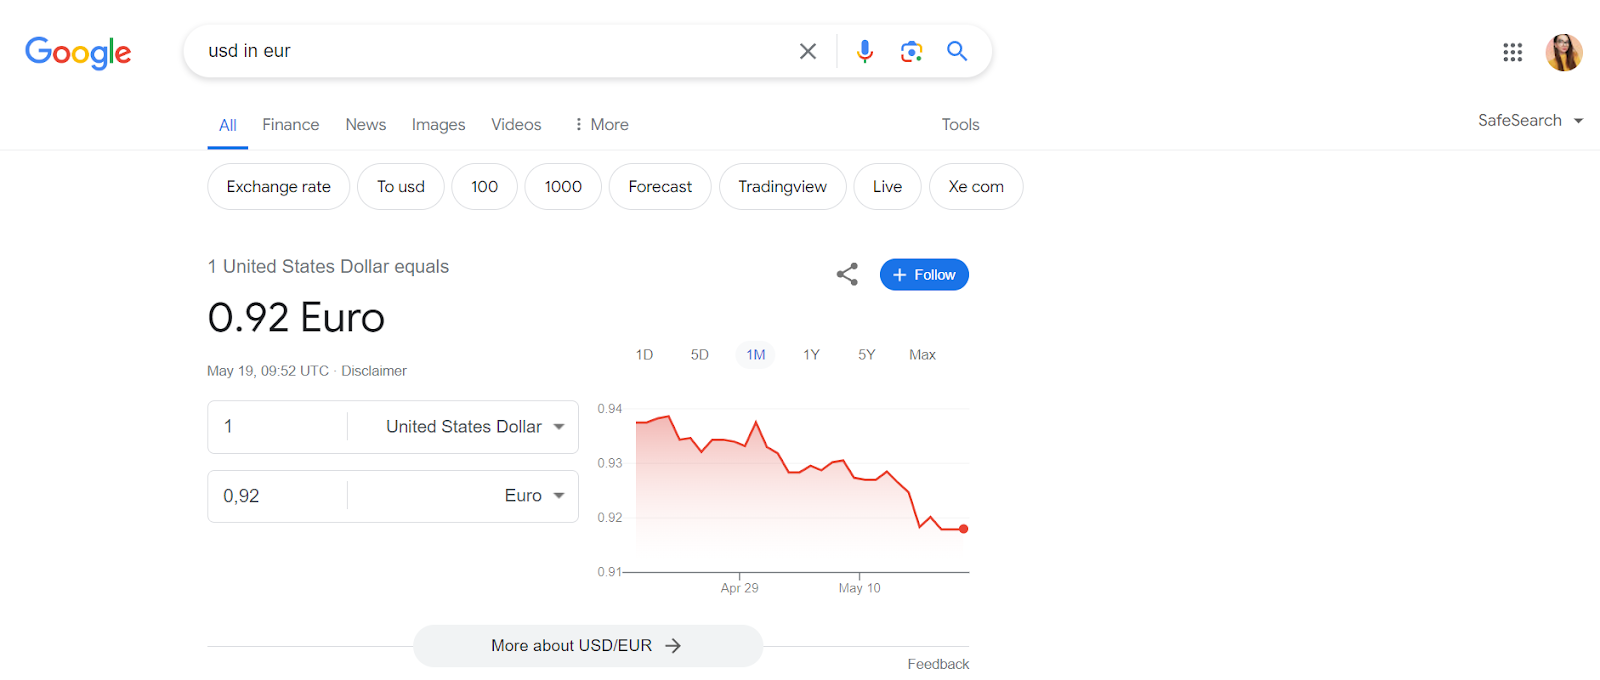 Search query for “USD in EUR”